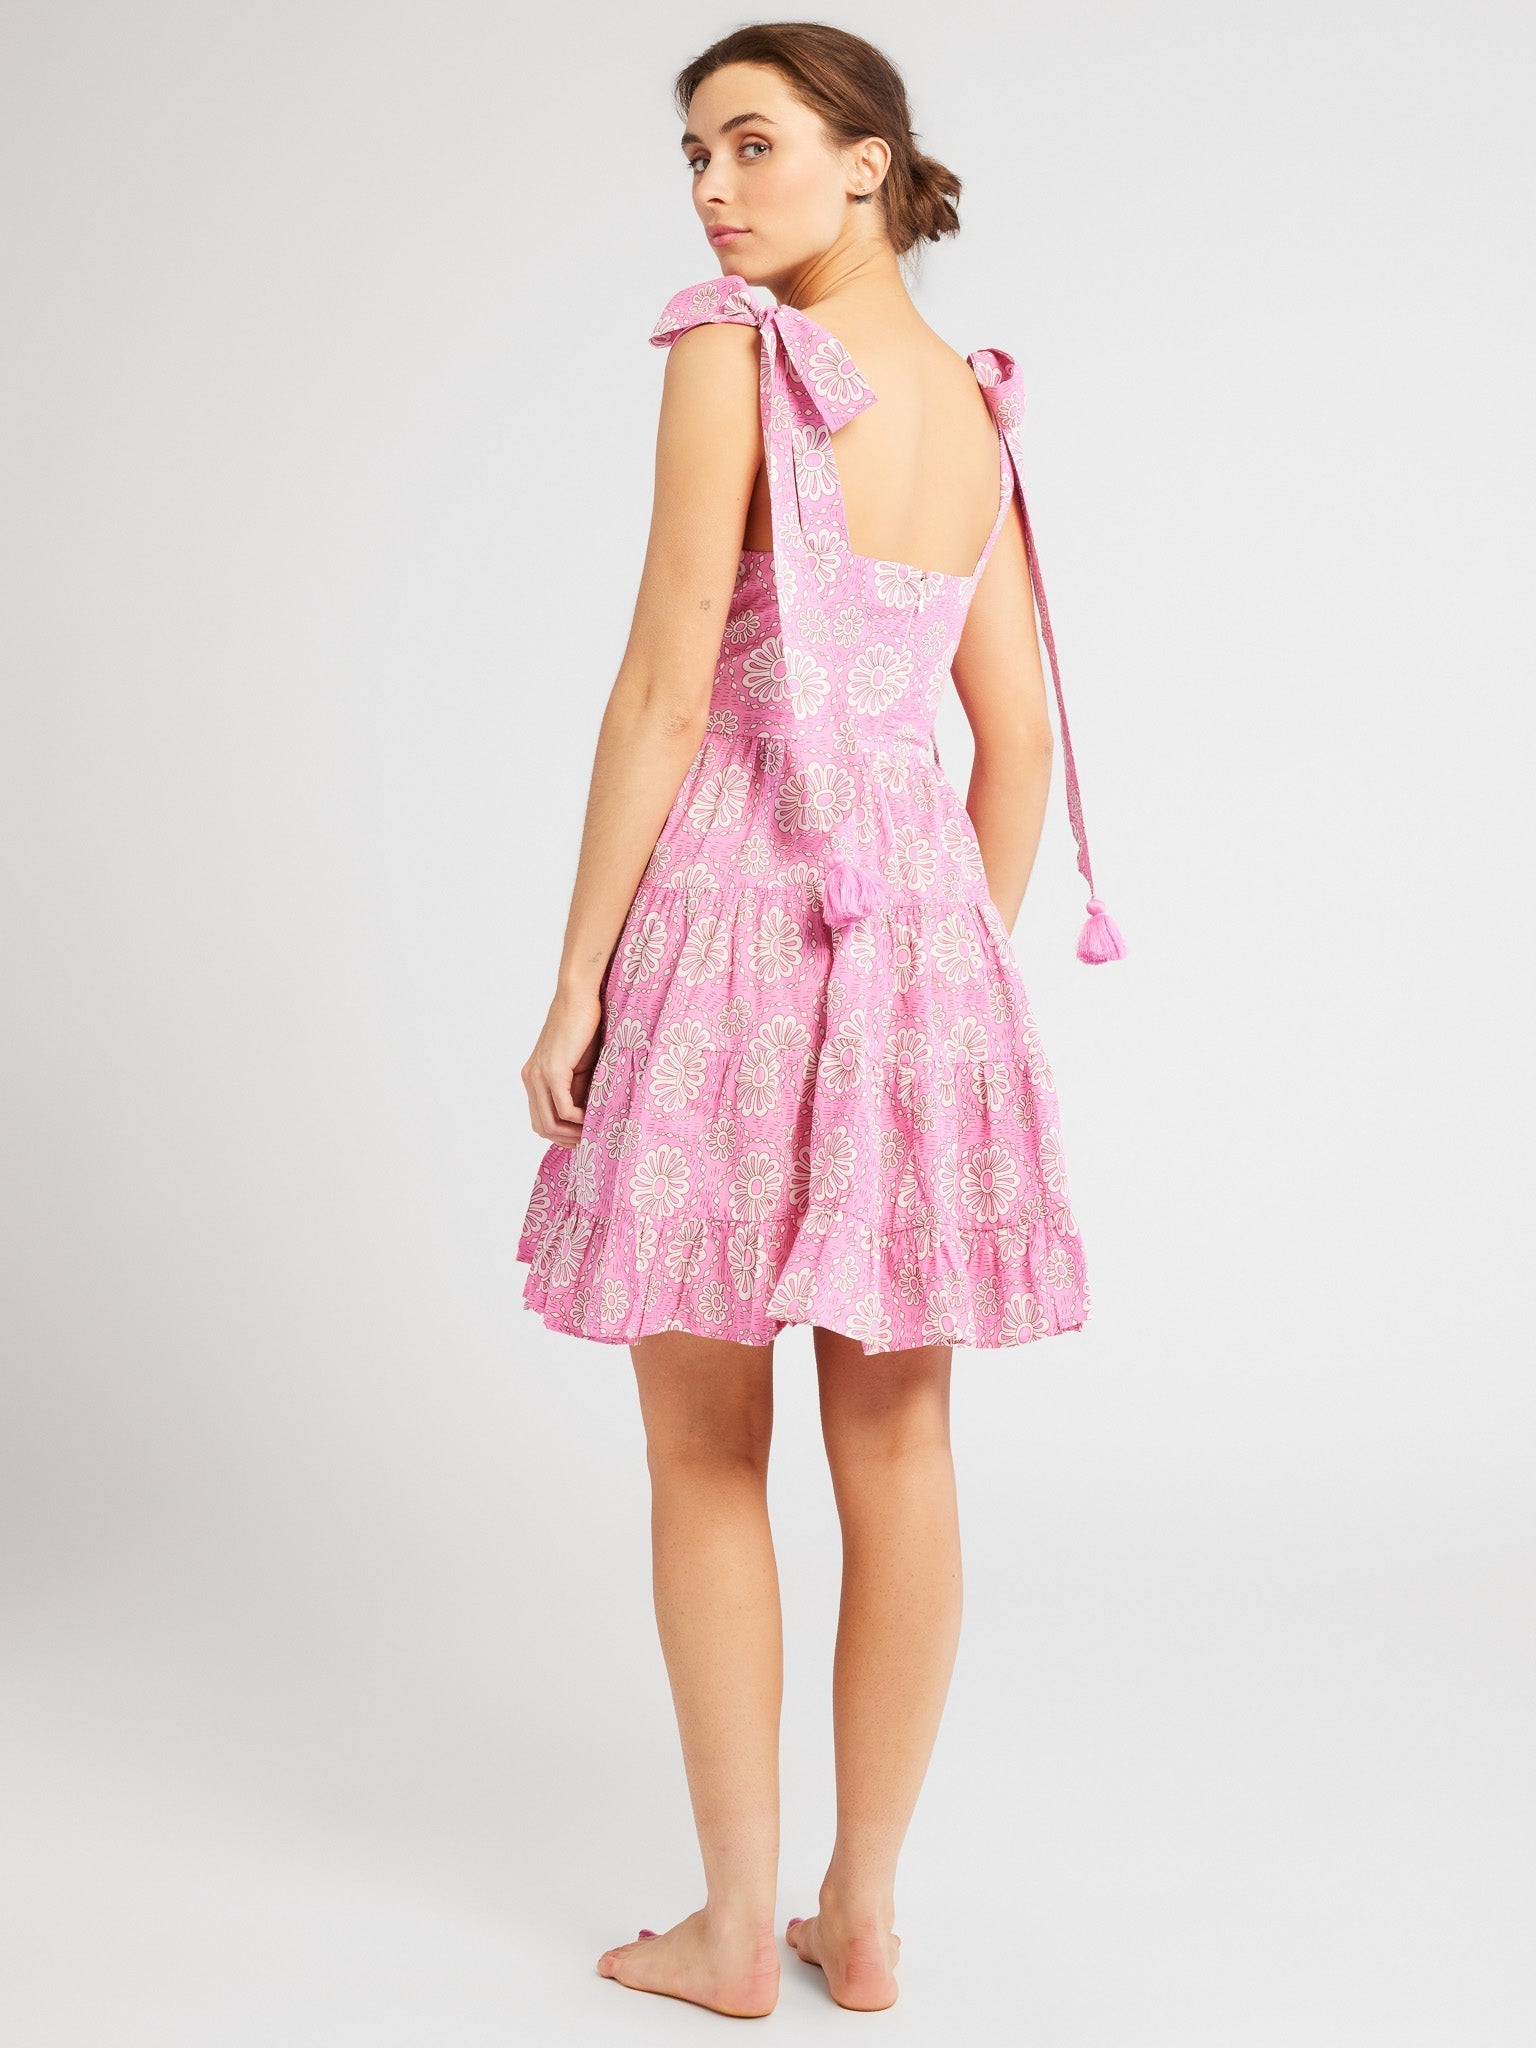 MILLE Clothing Kiara Dress in Pink Daisy